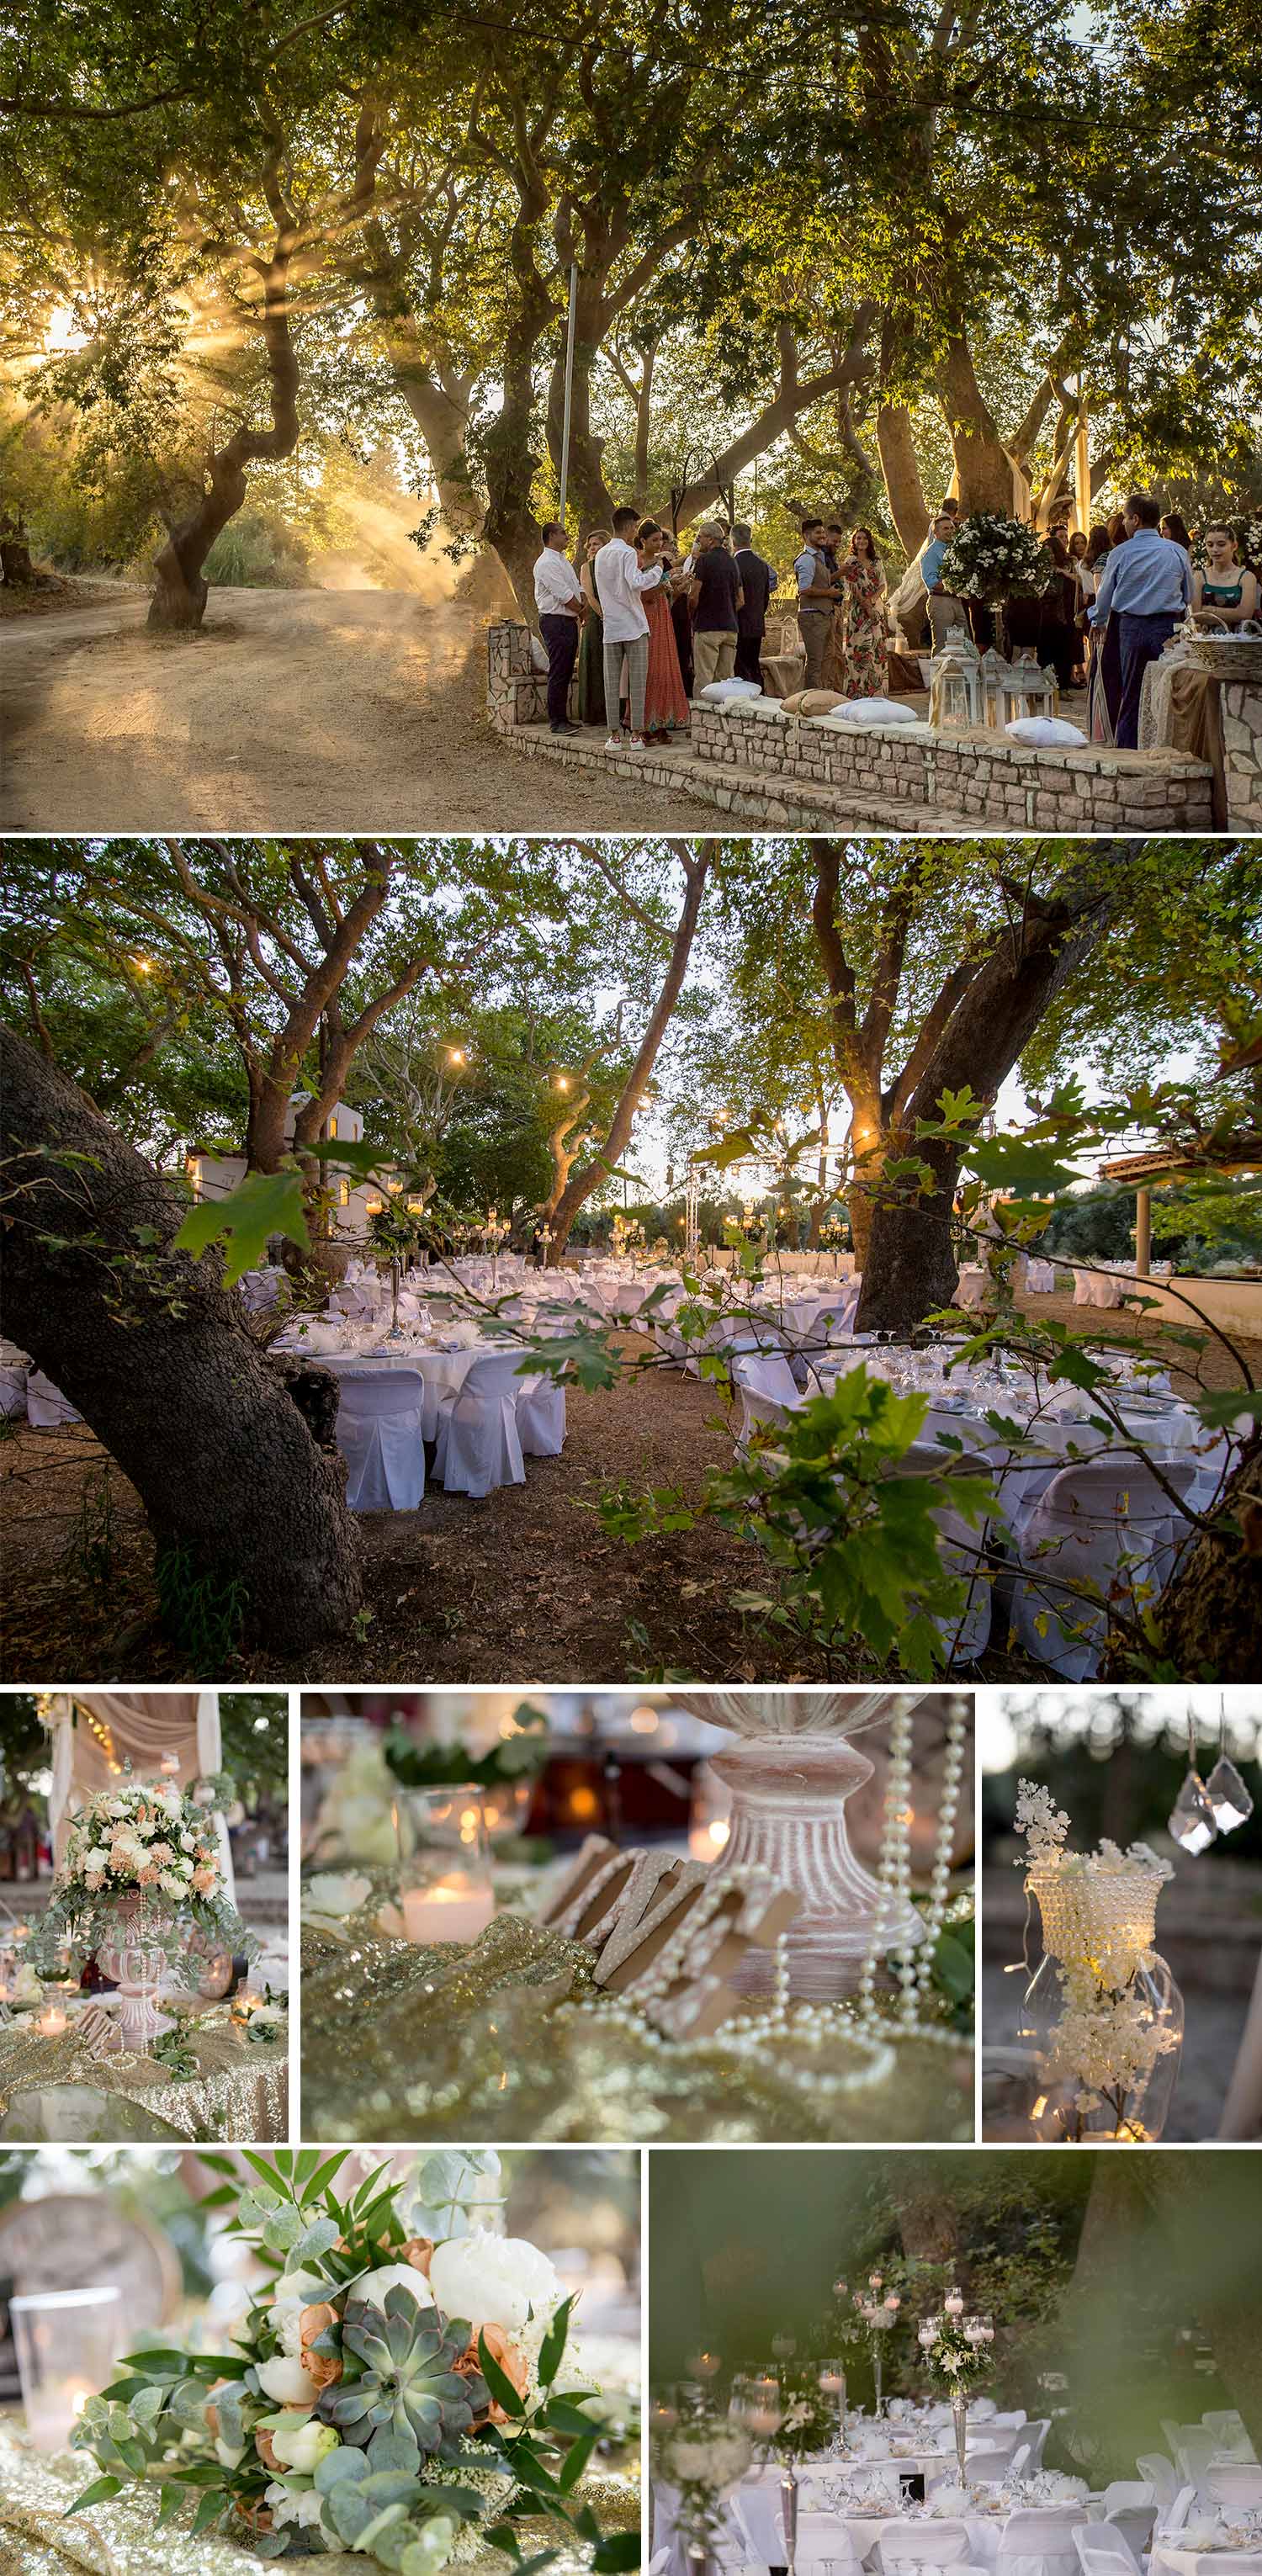 A-magical-wedding-in-a-forest-by-Diamond-Events-planning-company-04